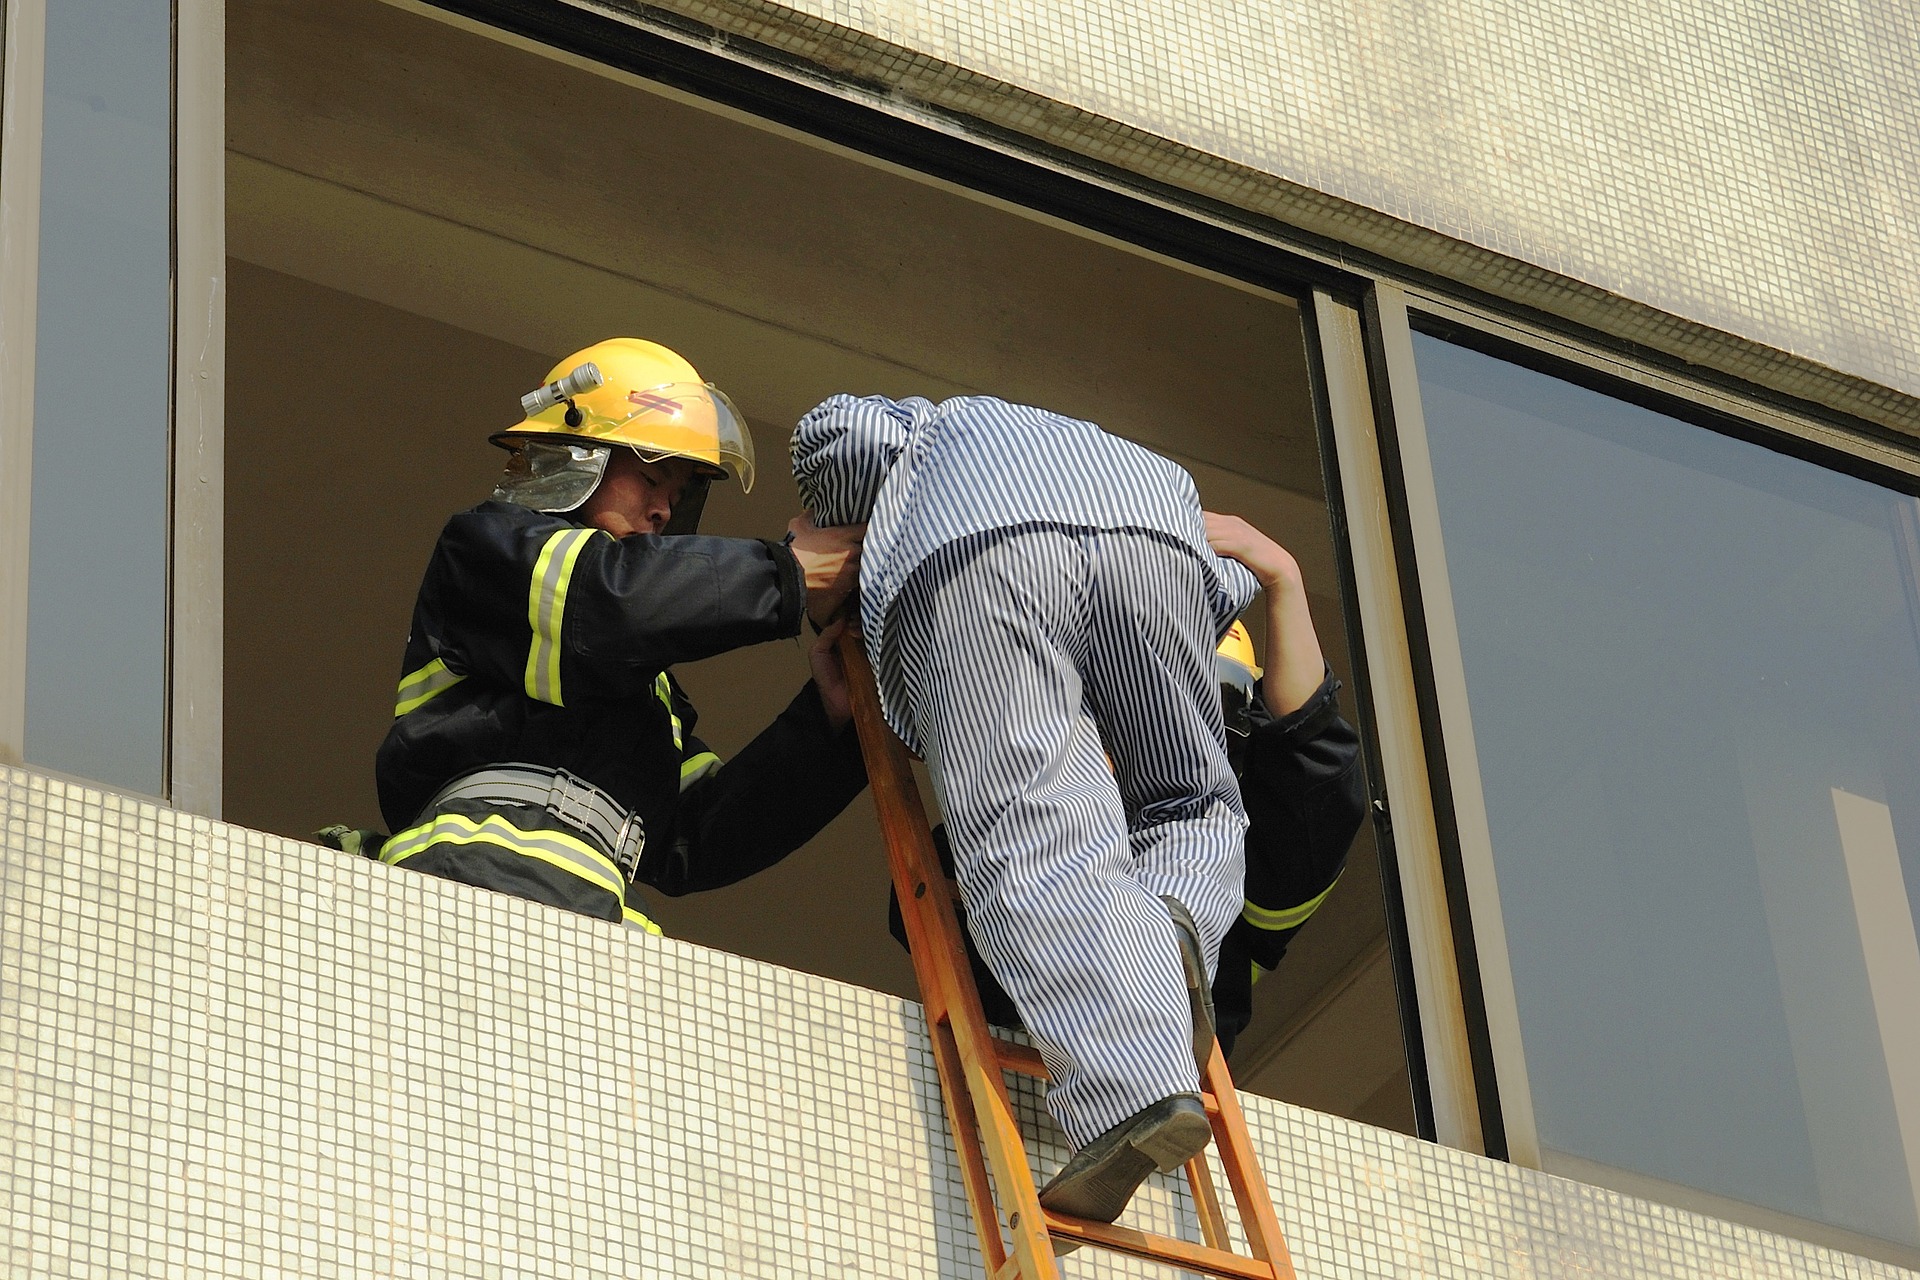 Fire fighter helping person out of window 